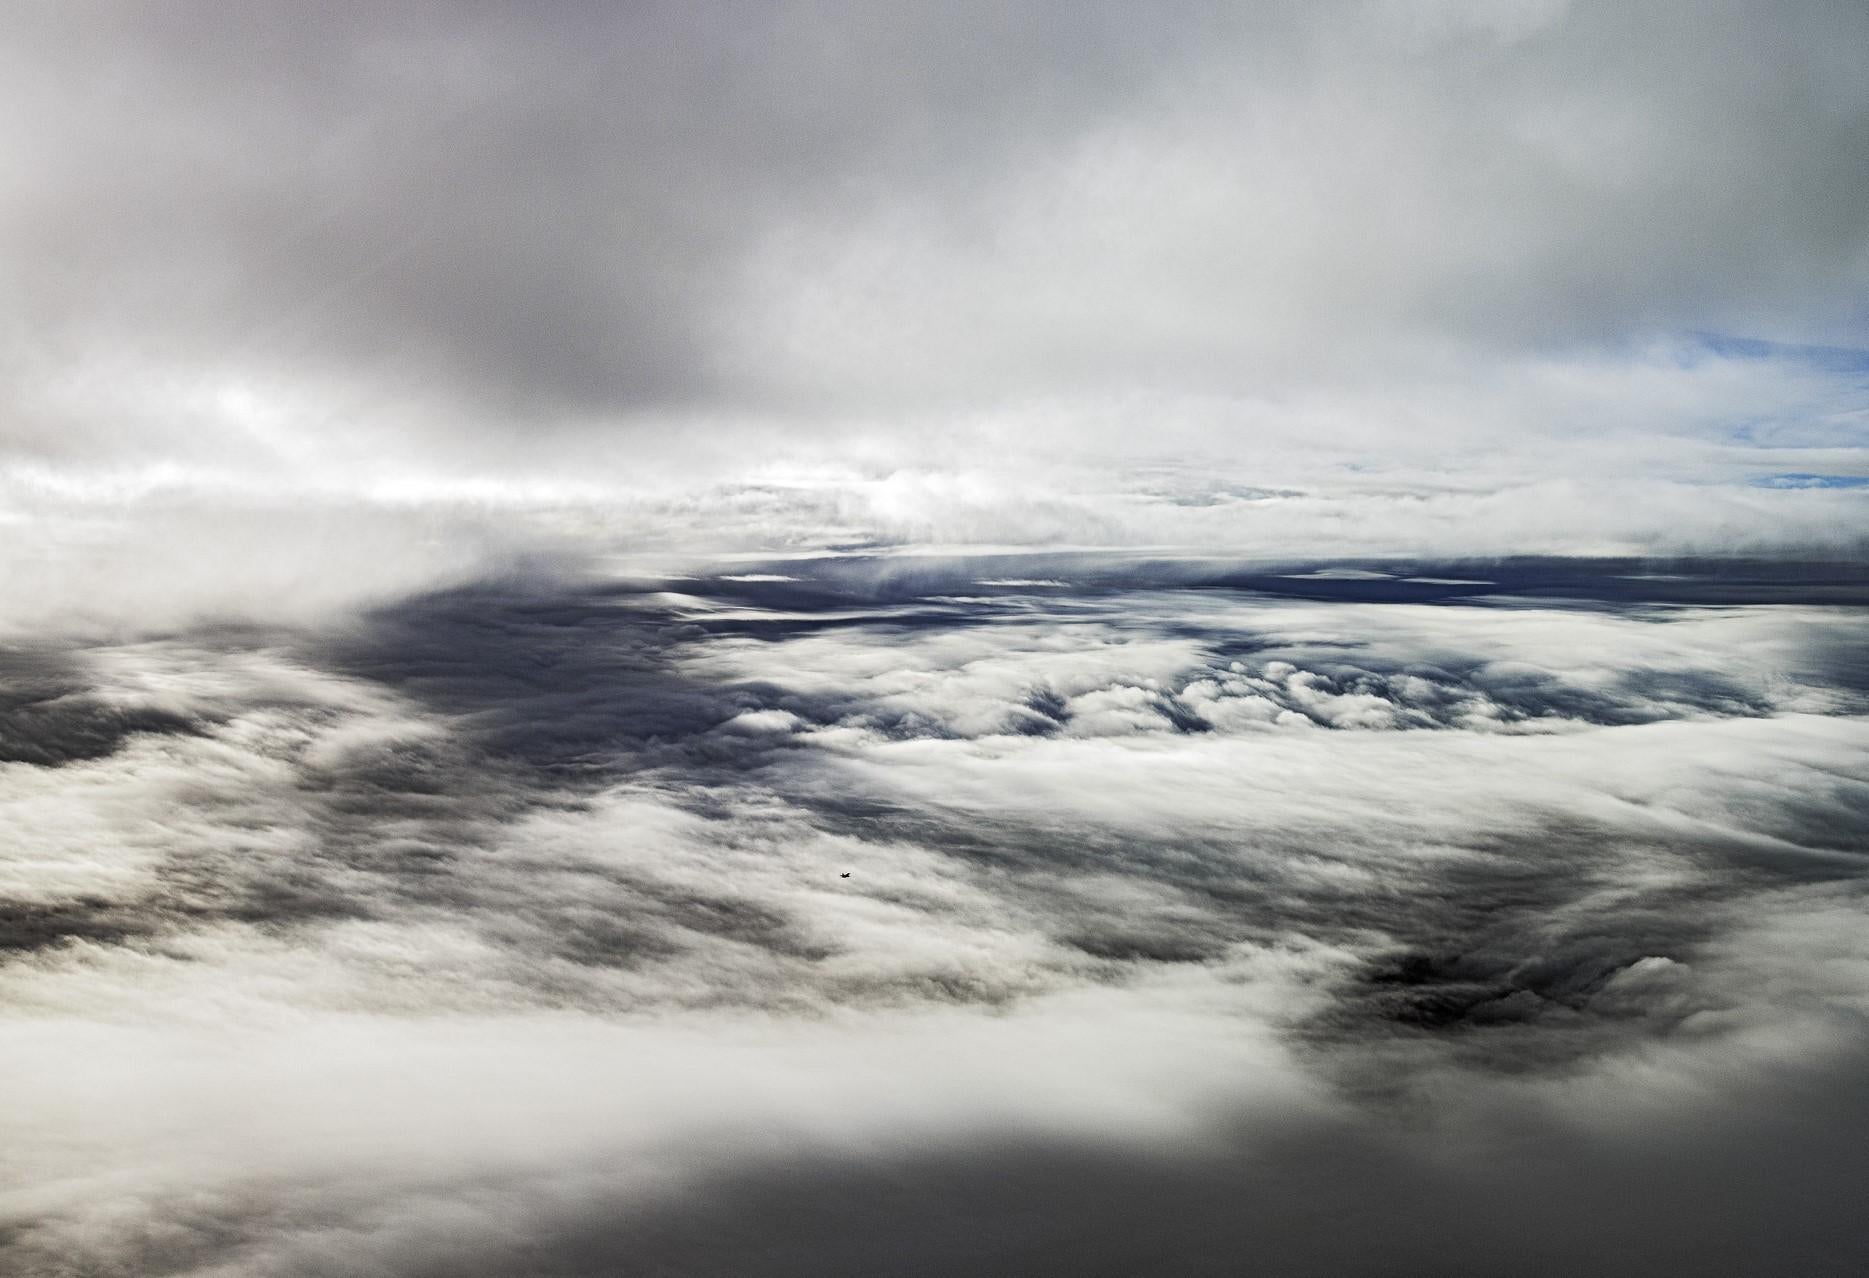 Lost in clouds, UK channel 2014 - # 1 / 5 Limited Edition Fine Art Photography